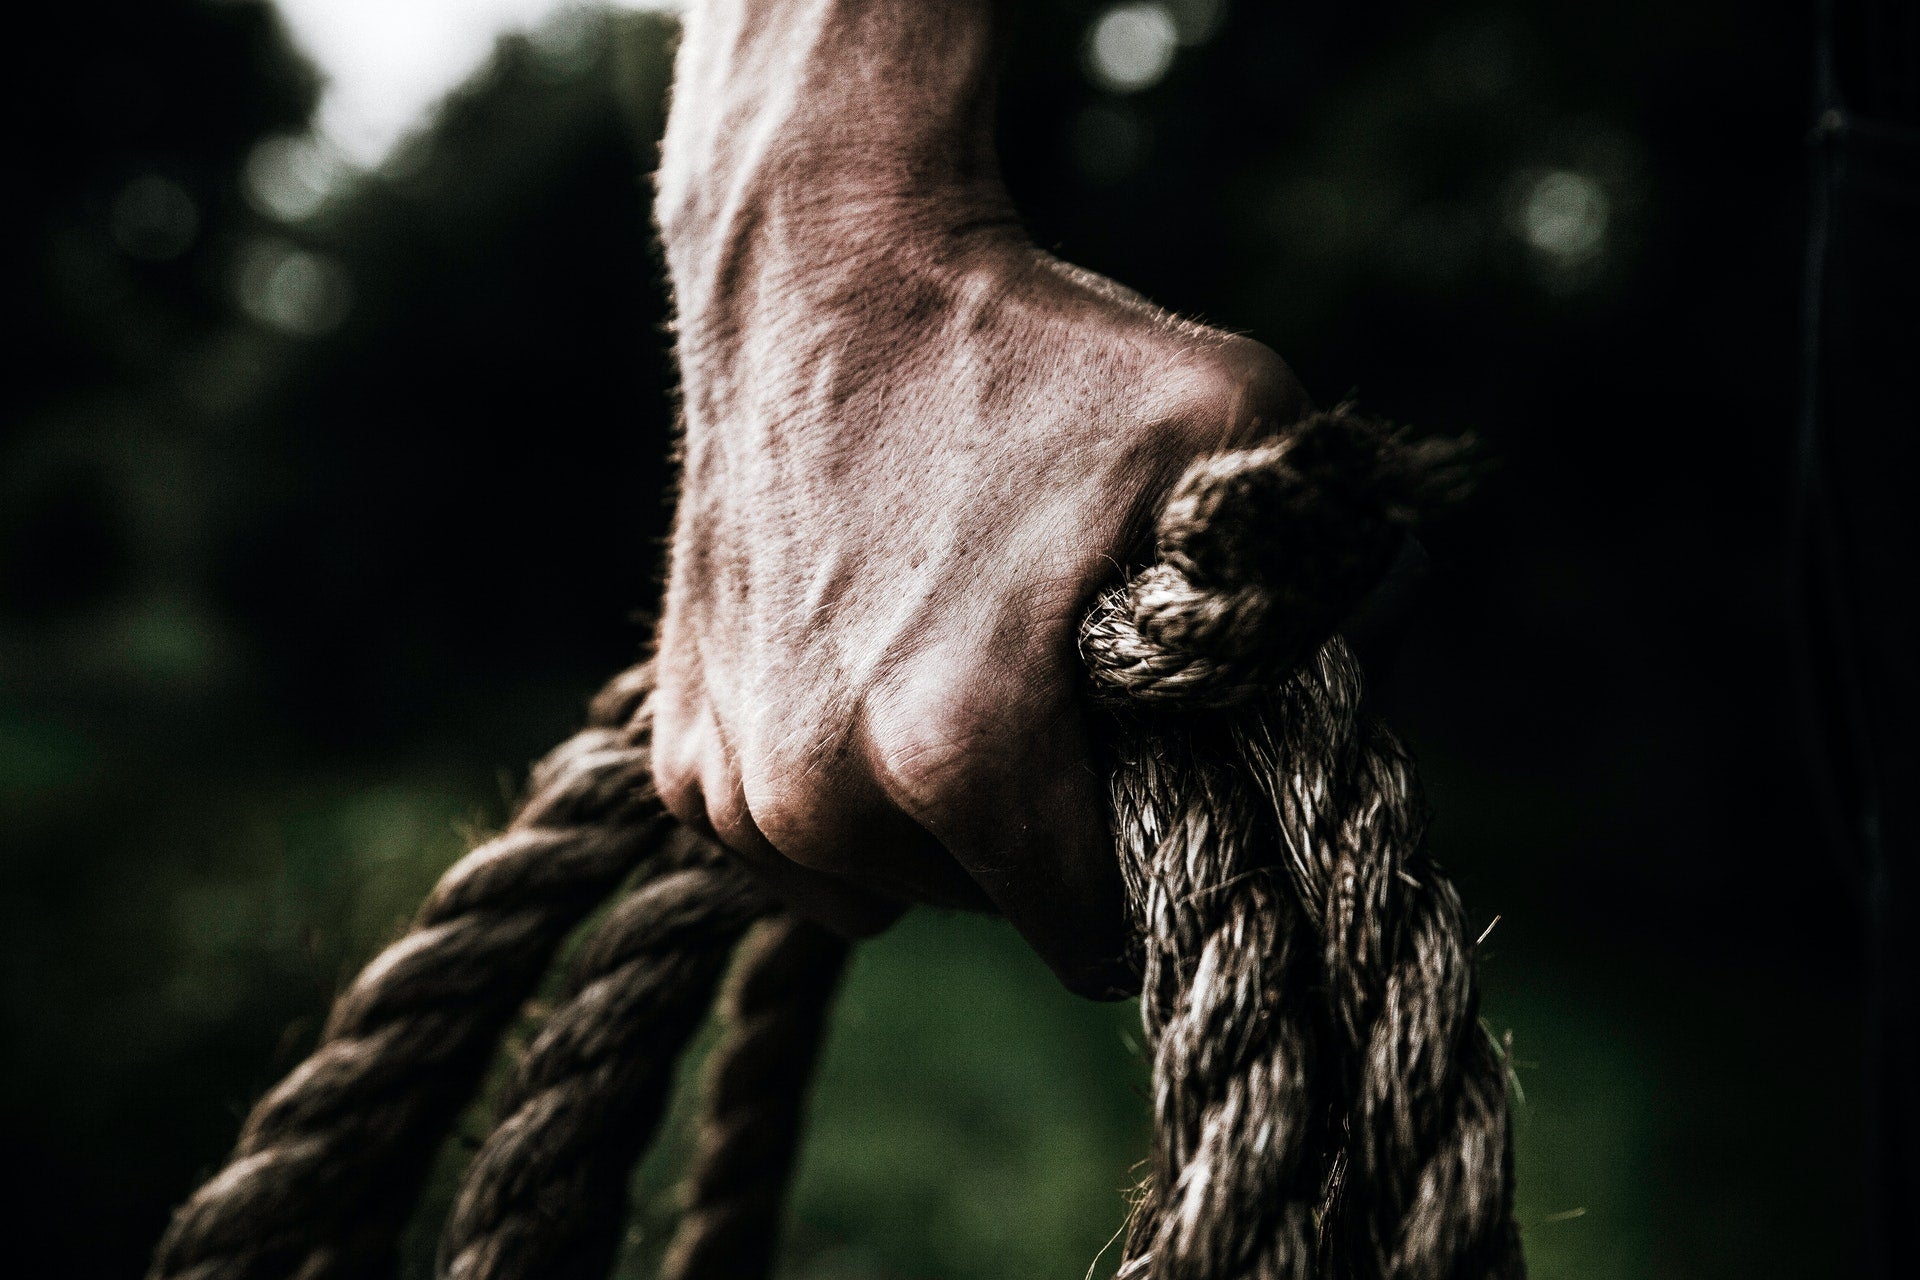 A hand Griping Rope